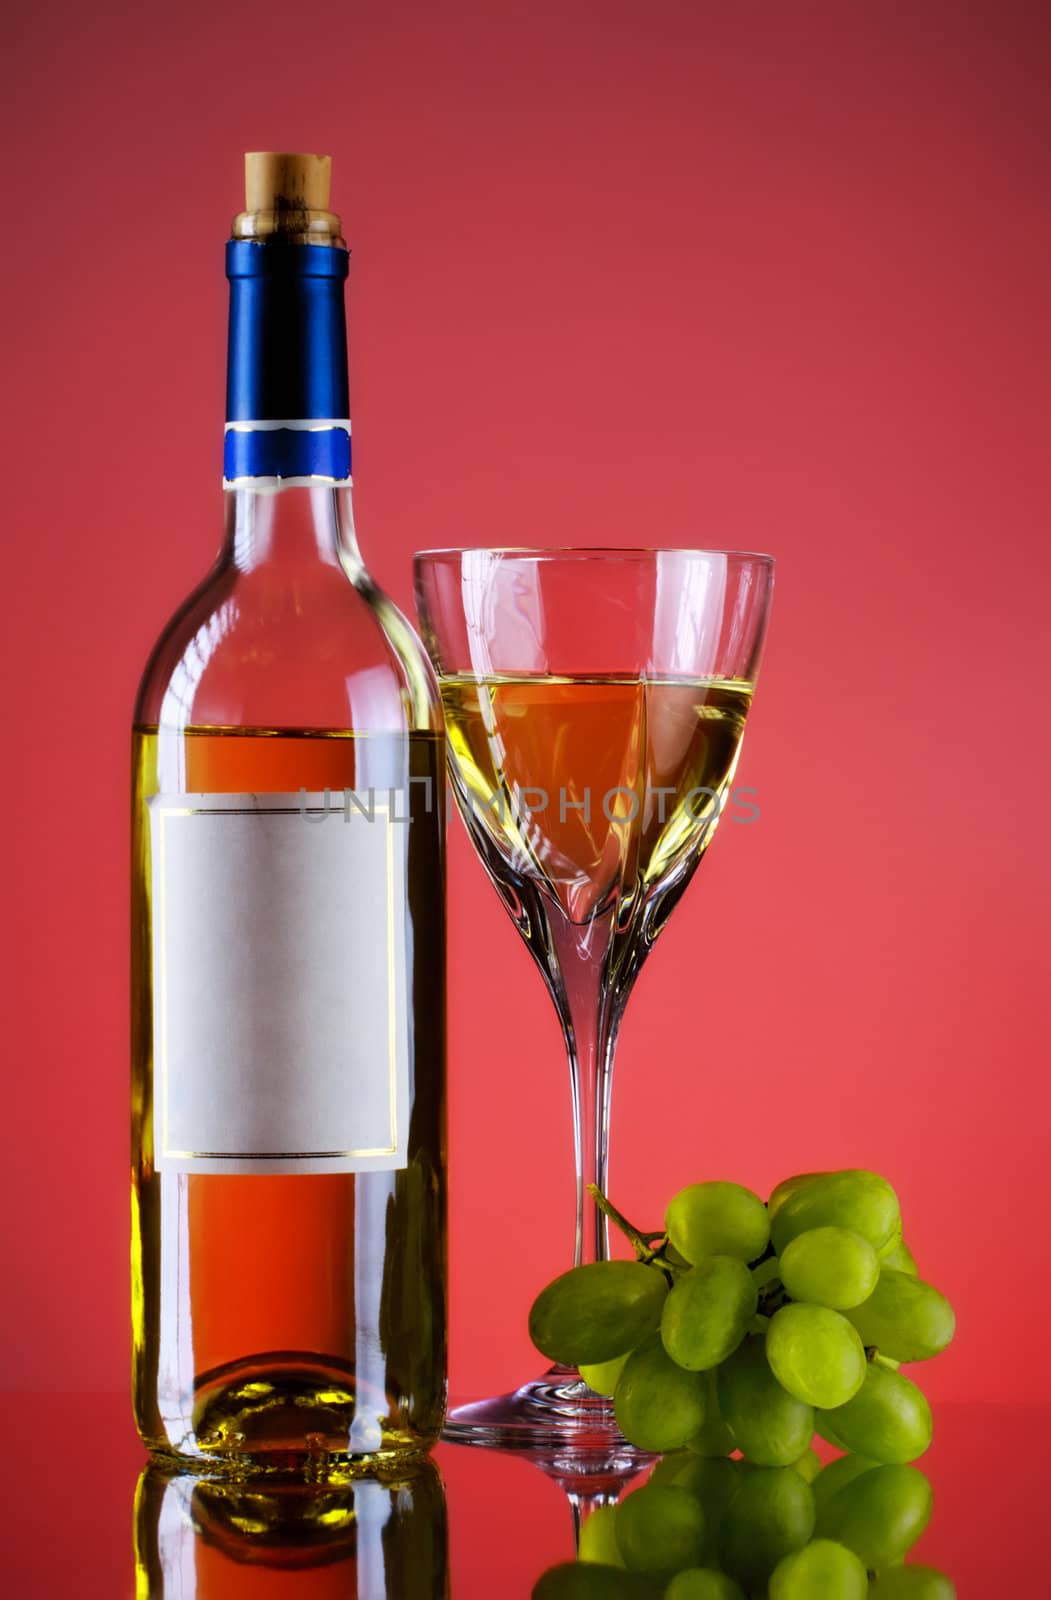 bottle and glass of wine, grape bunch, red background